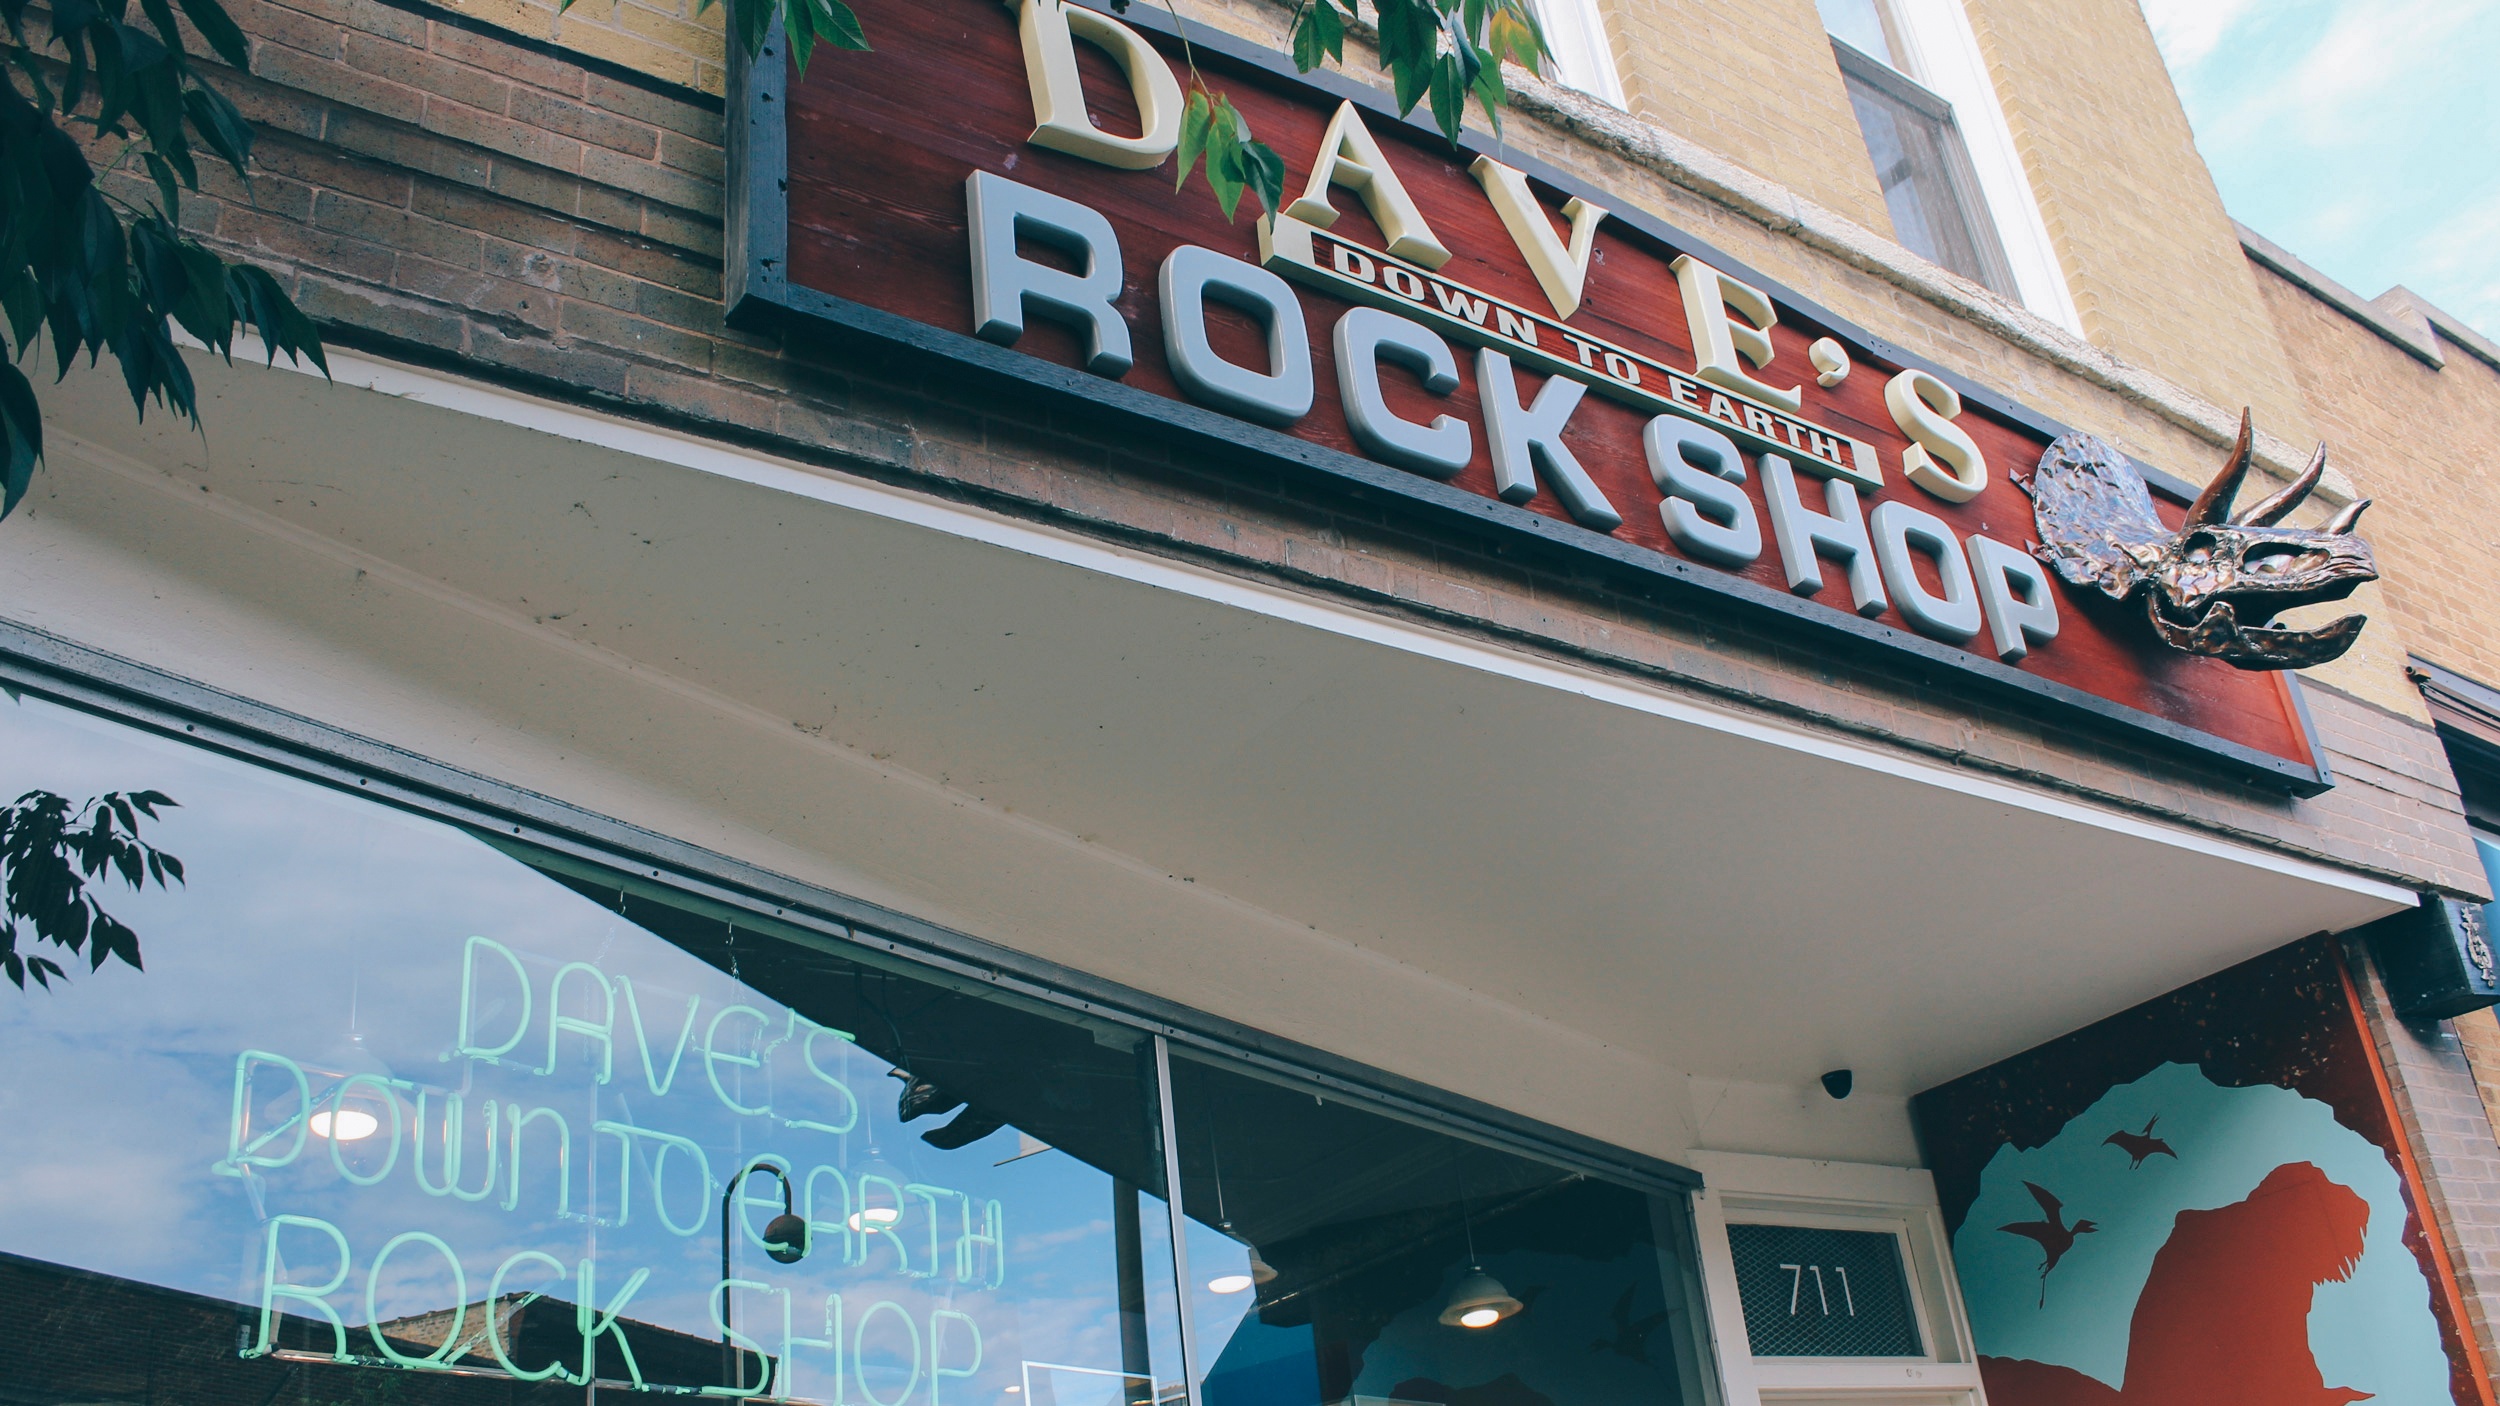 daves down to earth rock shop outside.jpg